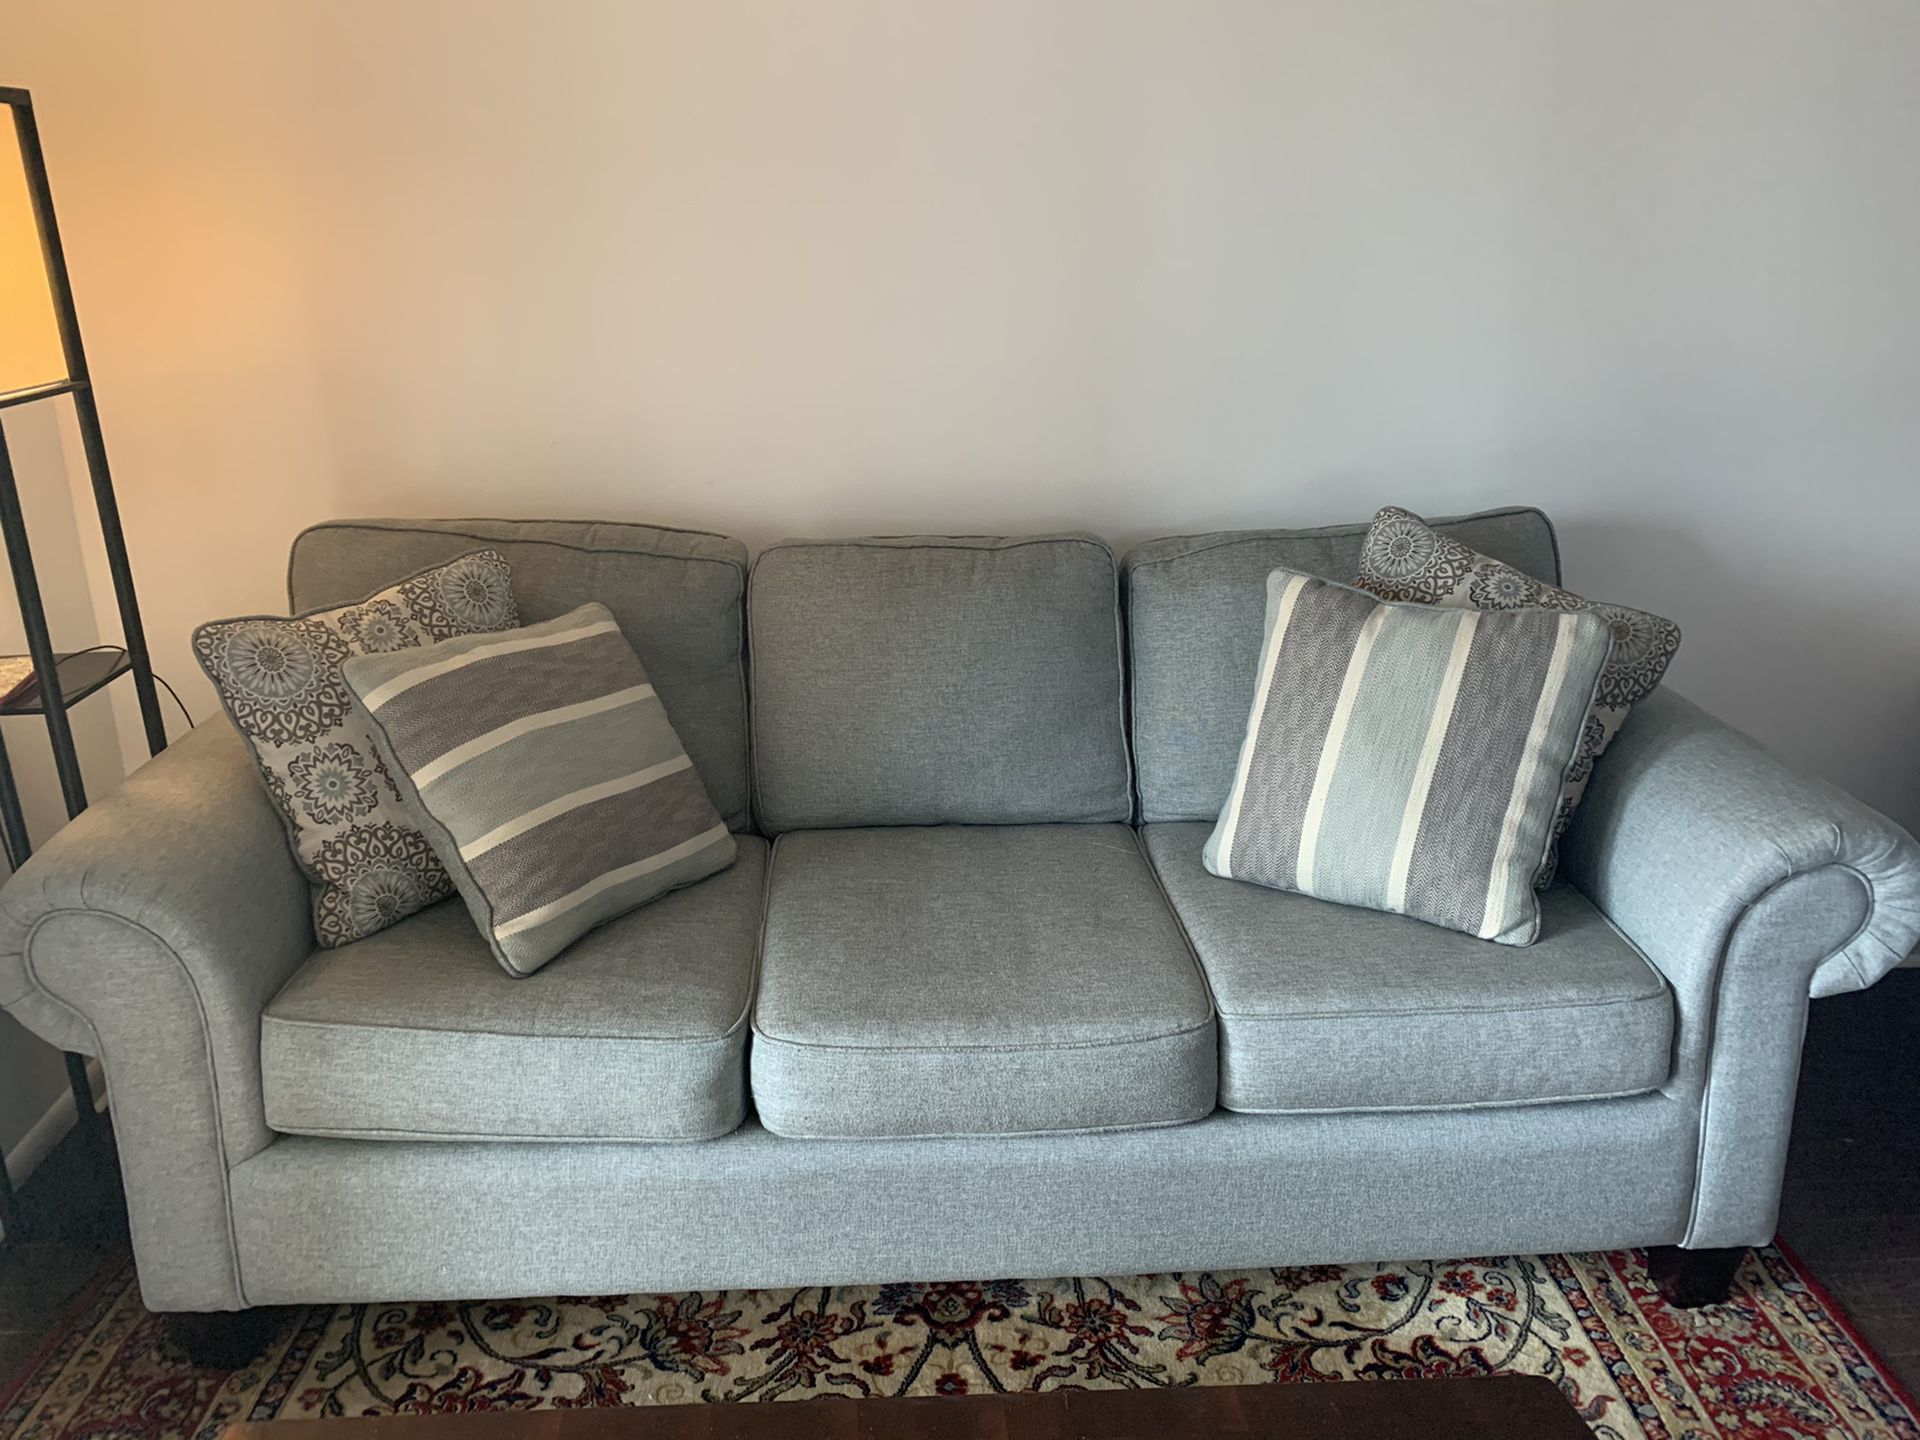 Sofa with protection guard